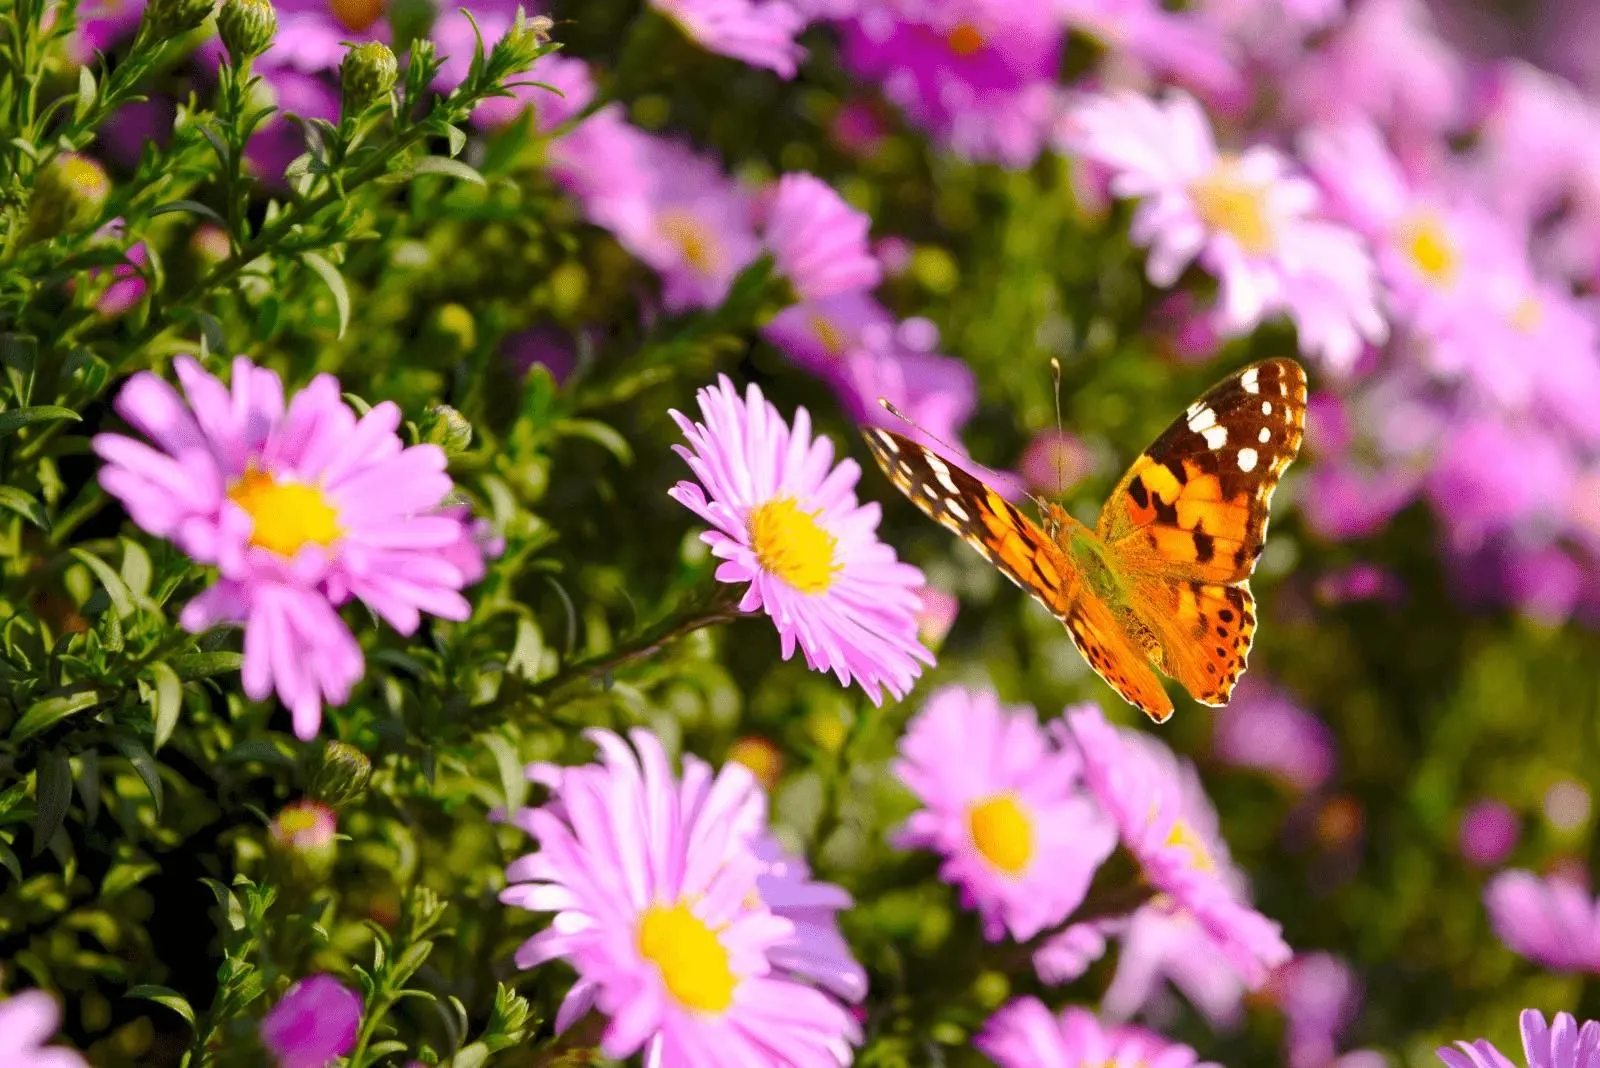 beautiful aster flowers on which a butterfly landed